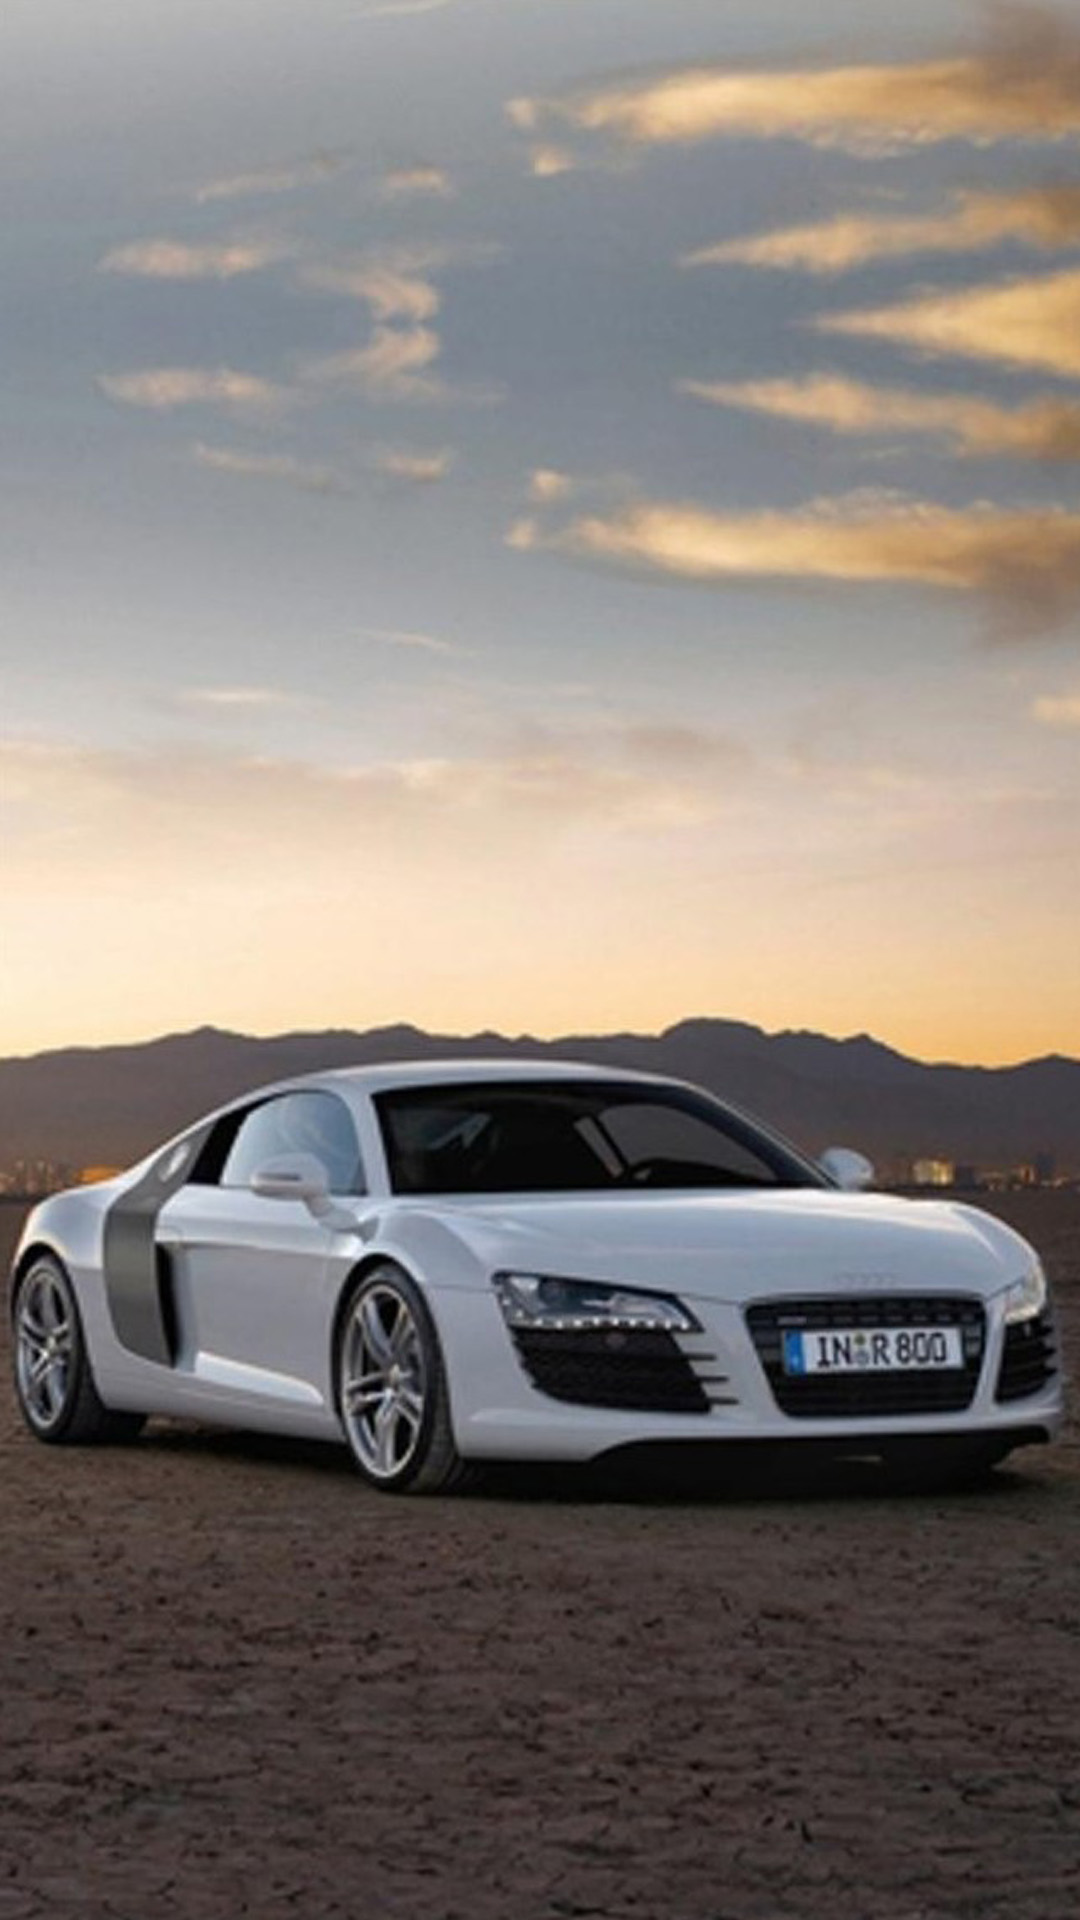 Download Free Photos Car Iphone - Audi R8 Iphone Background - HD Wallpaper 